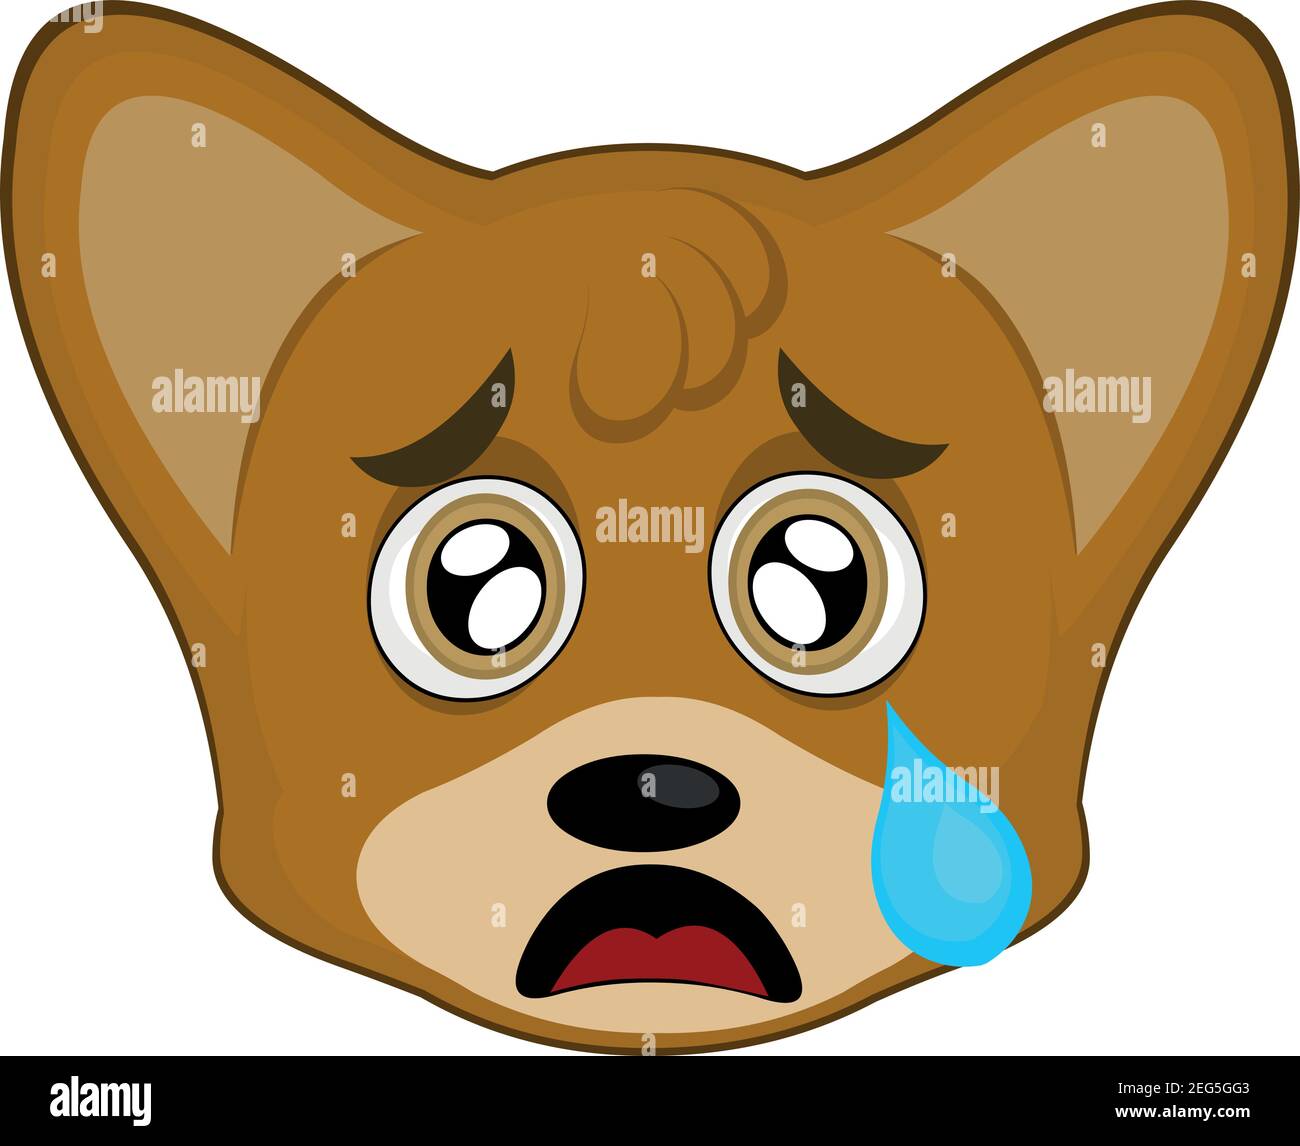 .Vector illustration of the face of a cartoon fox with a sad expression Stock Vector